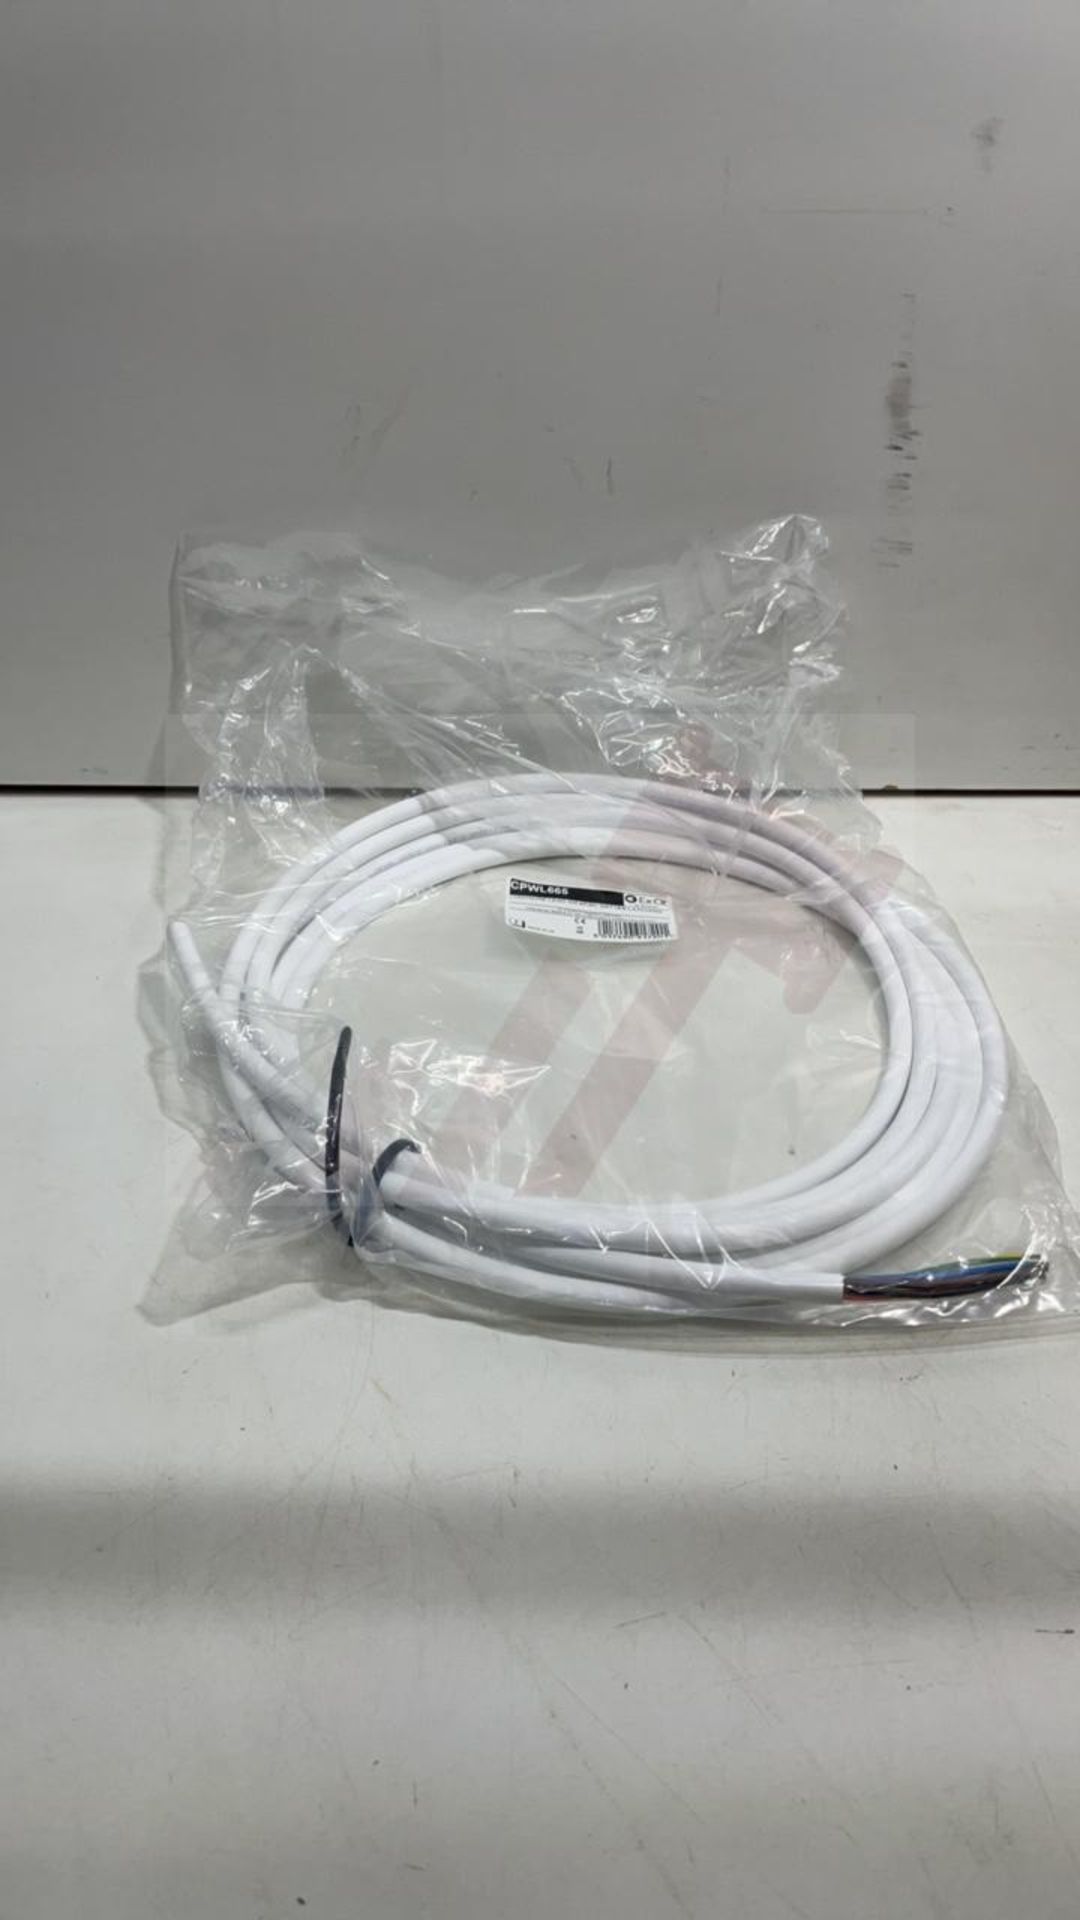 17 X 5m lenghths of 6P/6C Luminaire leads